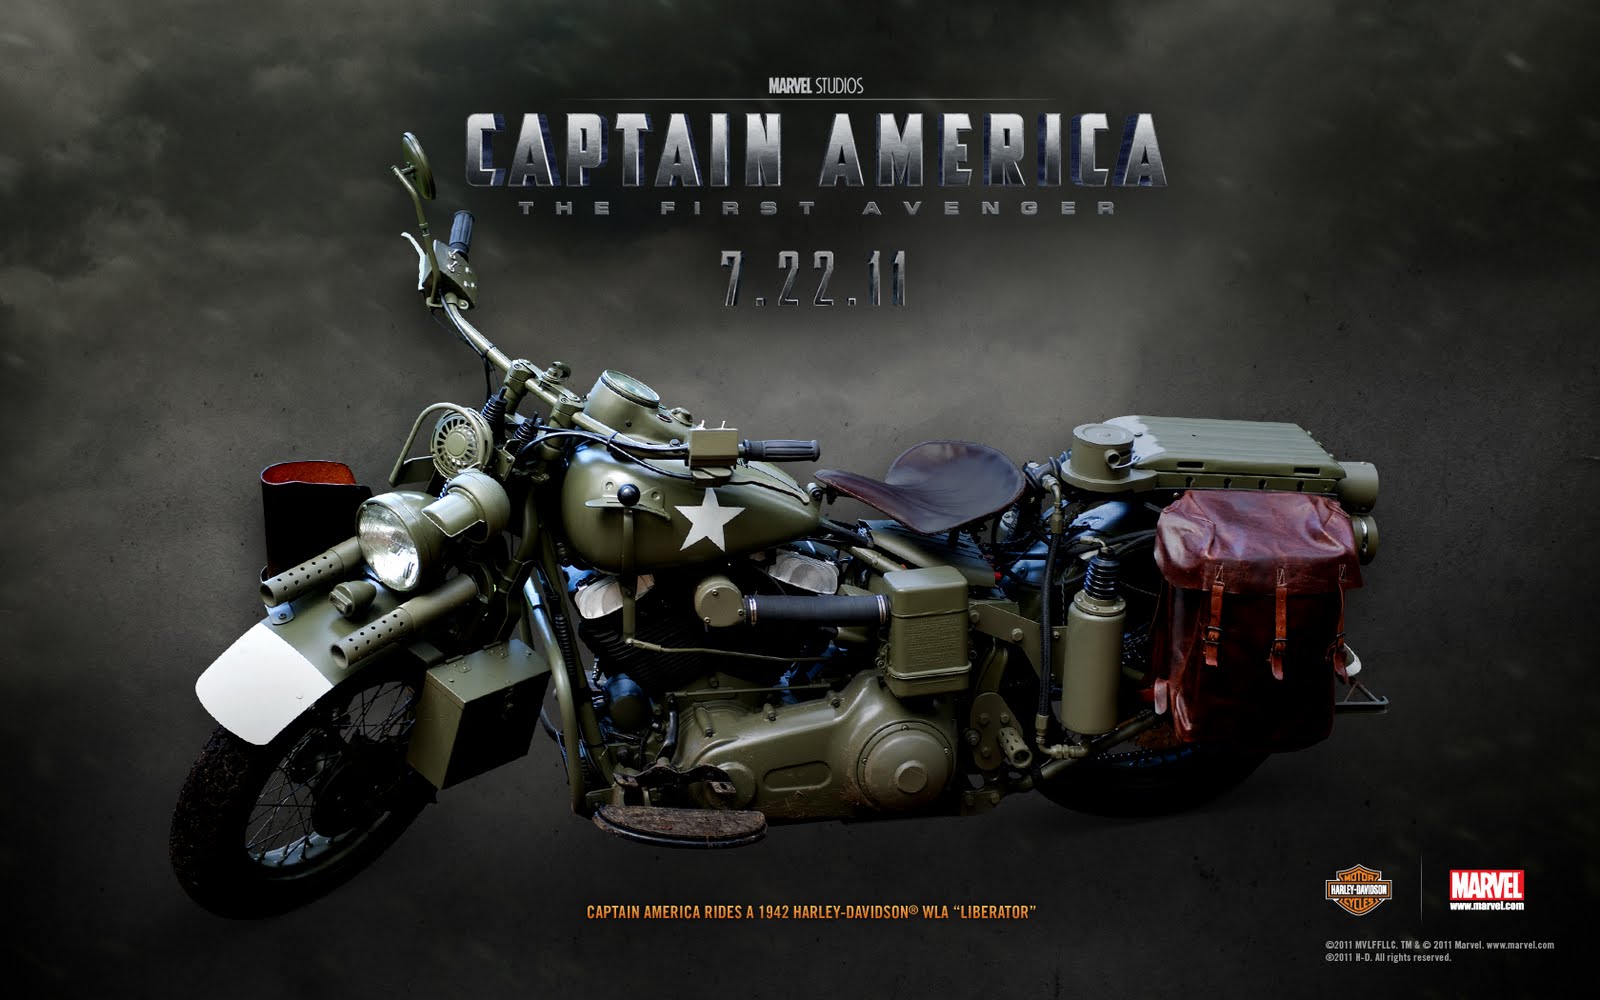 Harley Davidson 883 XWL WARBOY: Captain America's motorcycle ( the movie )